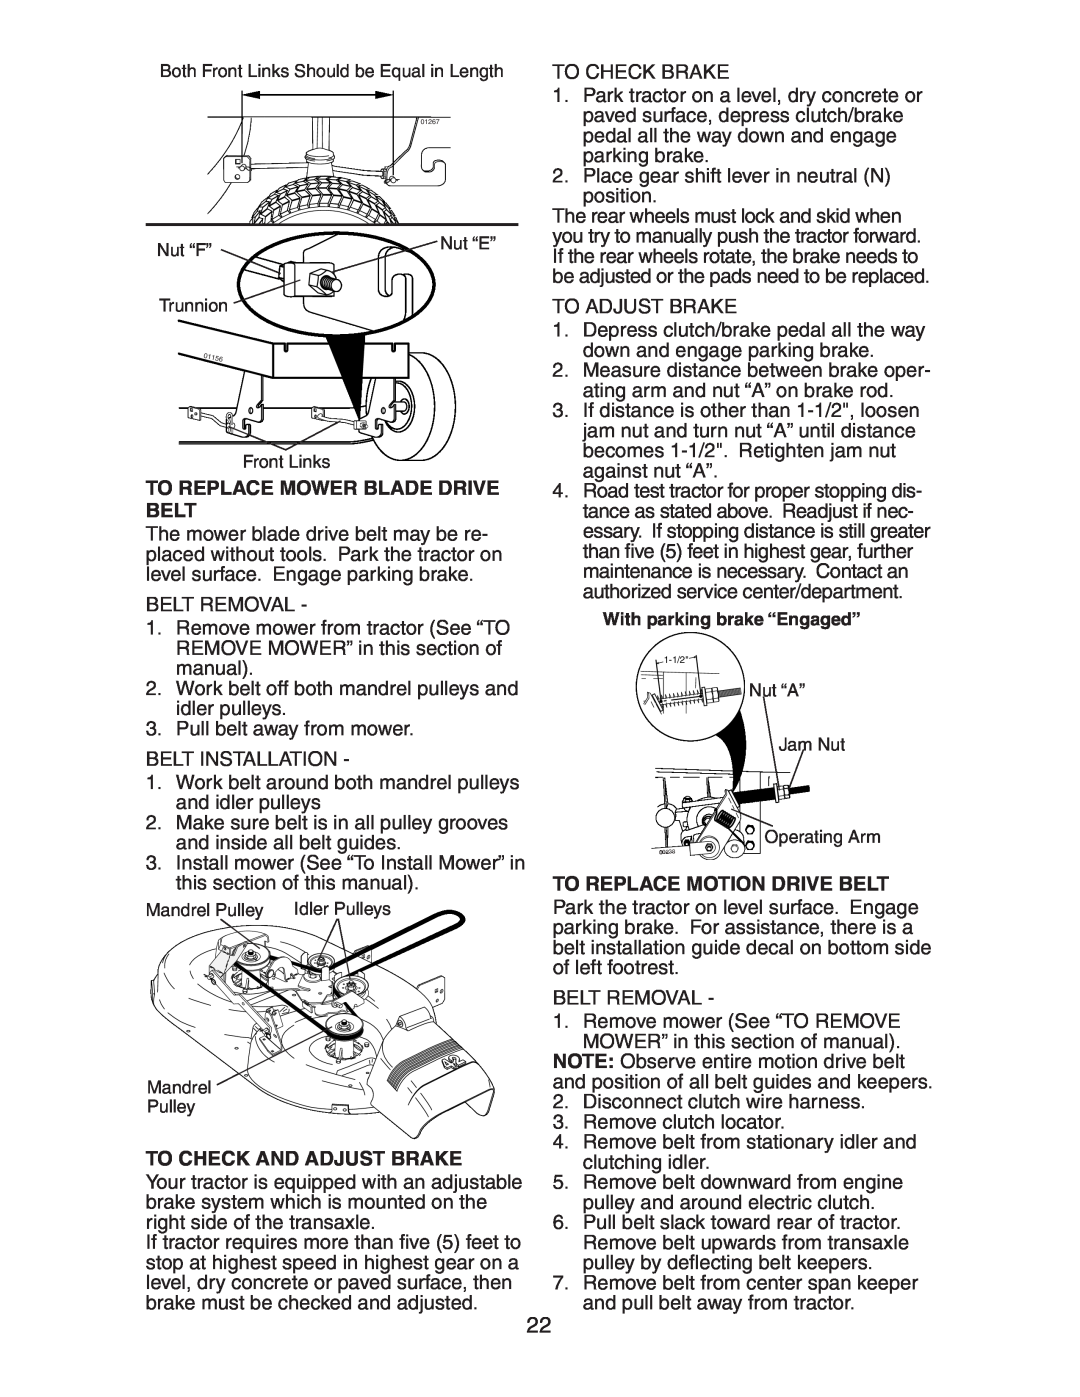 Poulan CO18542STB manual To Replace Mower Blade Drive Belt, To Check And Adjust Brake, To Replace Motion Drive Belt 